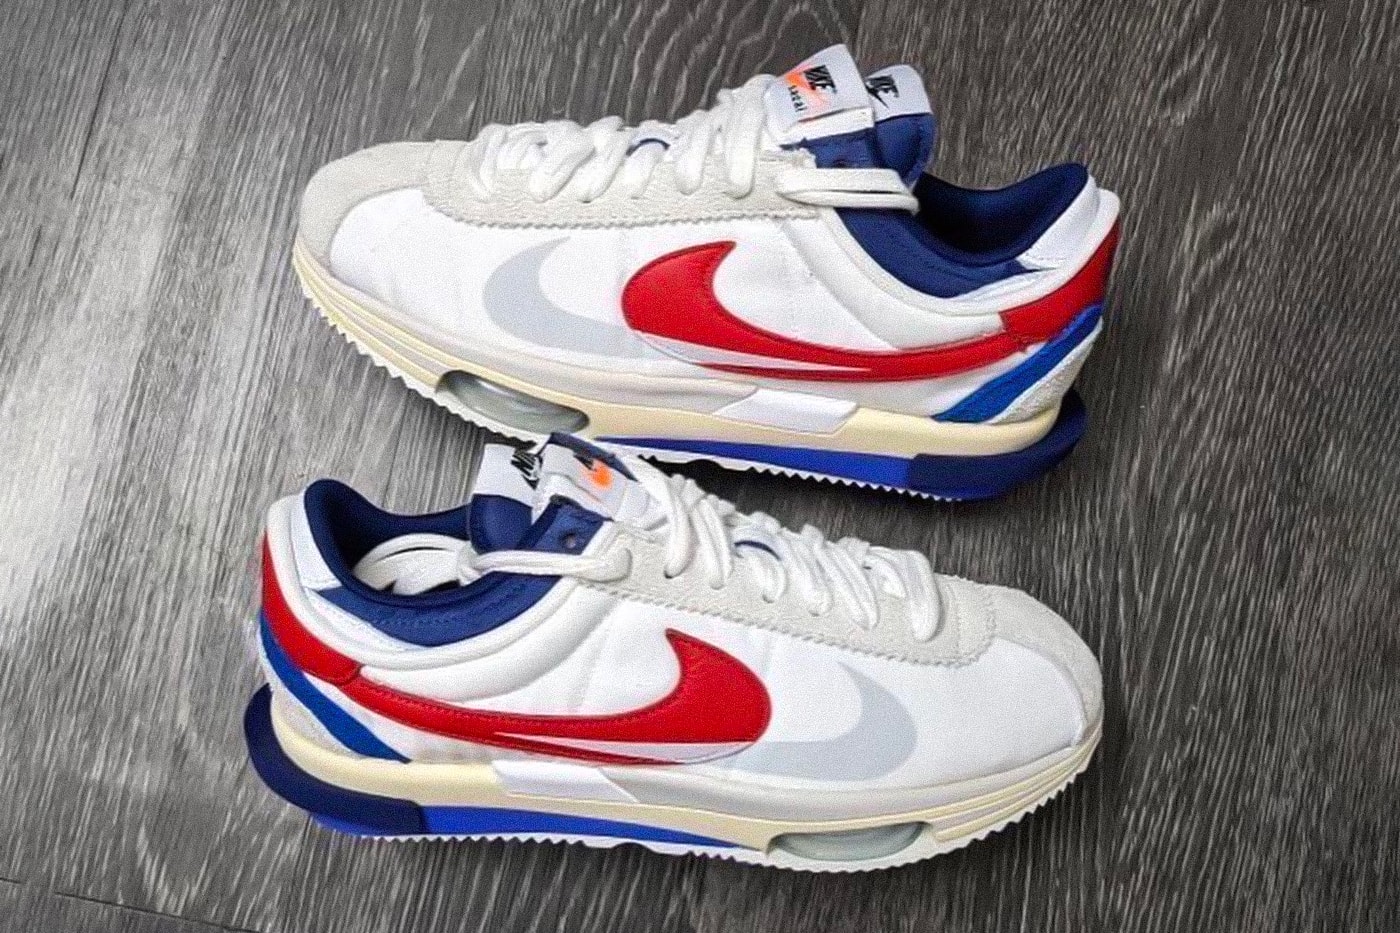 Sacai nike cortez 1972 Summer Olympics colorway 50th anniversary chitose abe red blue zoom air release info date price 